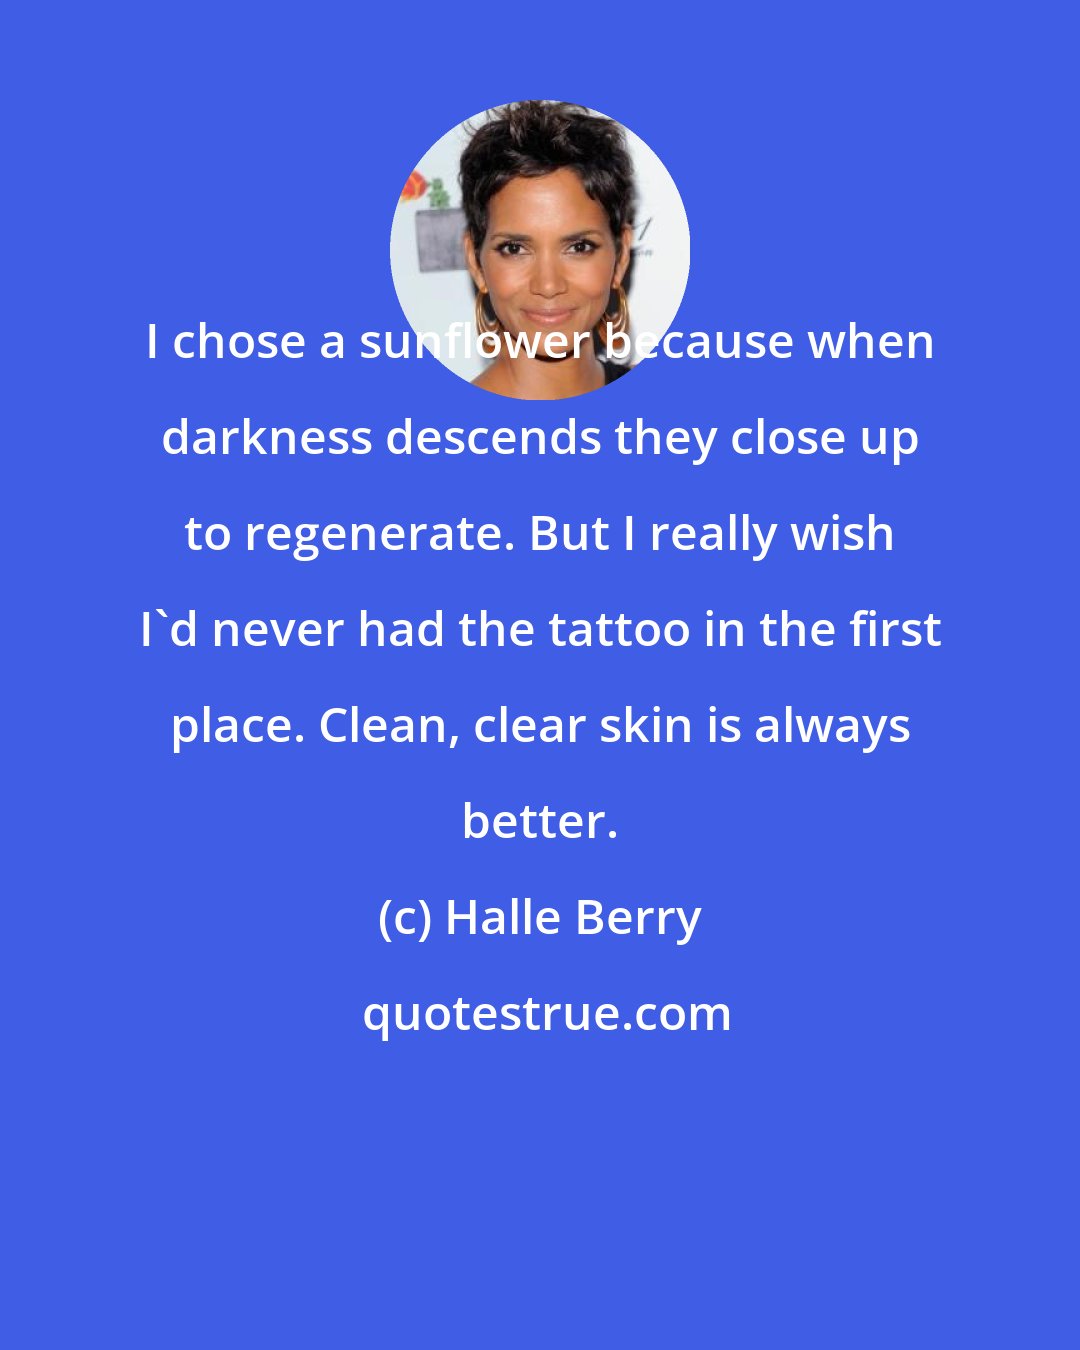 Halle Berry: I chose a sunflower because when darkness descends they close up to regenerate. But I really wish I'd never had the tattoo in the first place. Clean, clear skin is always better.